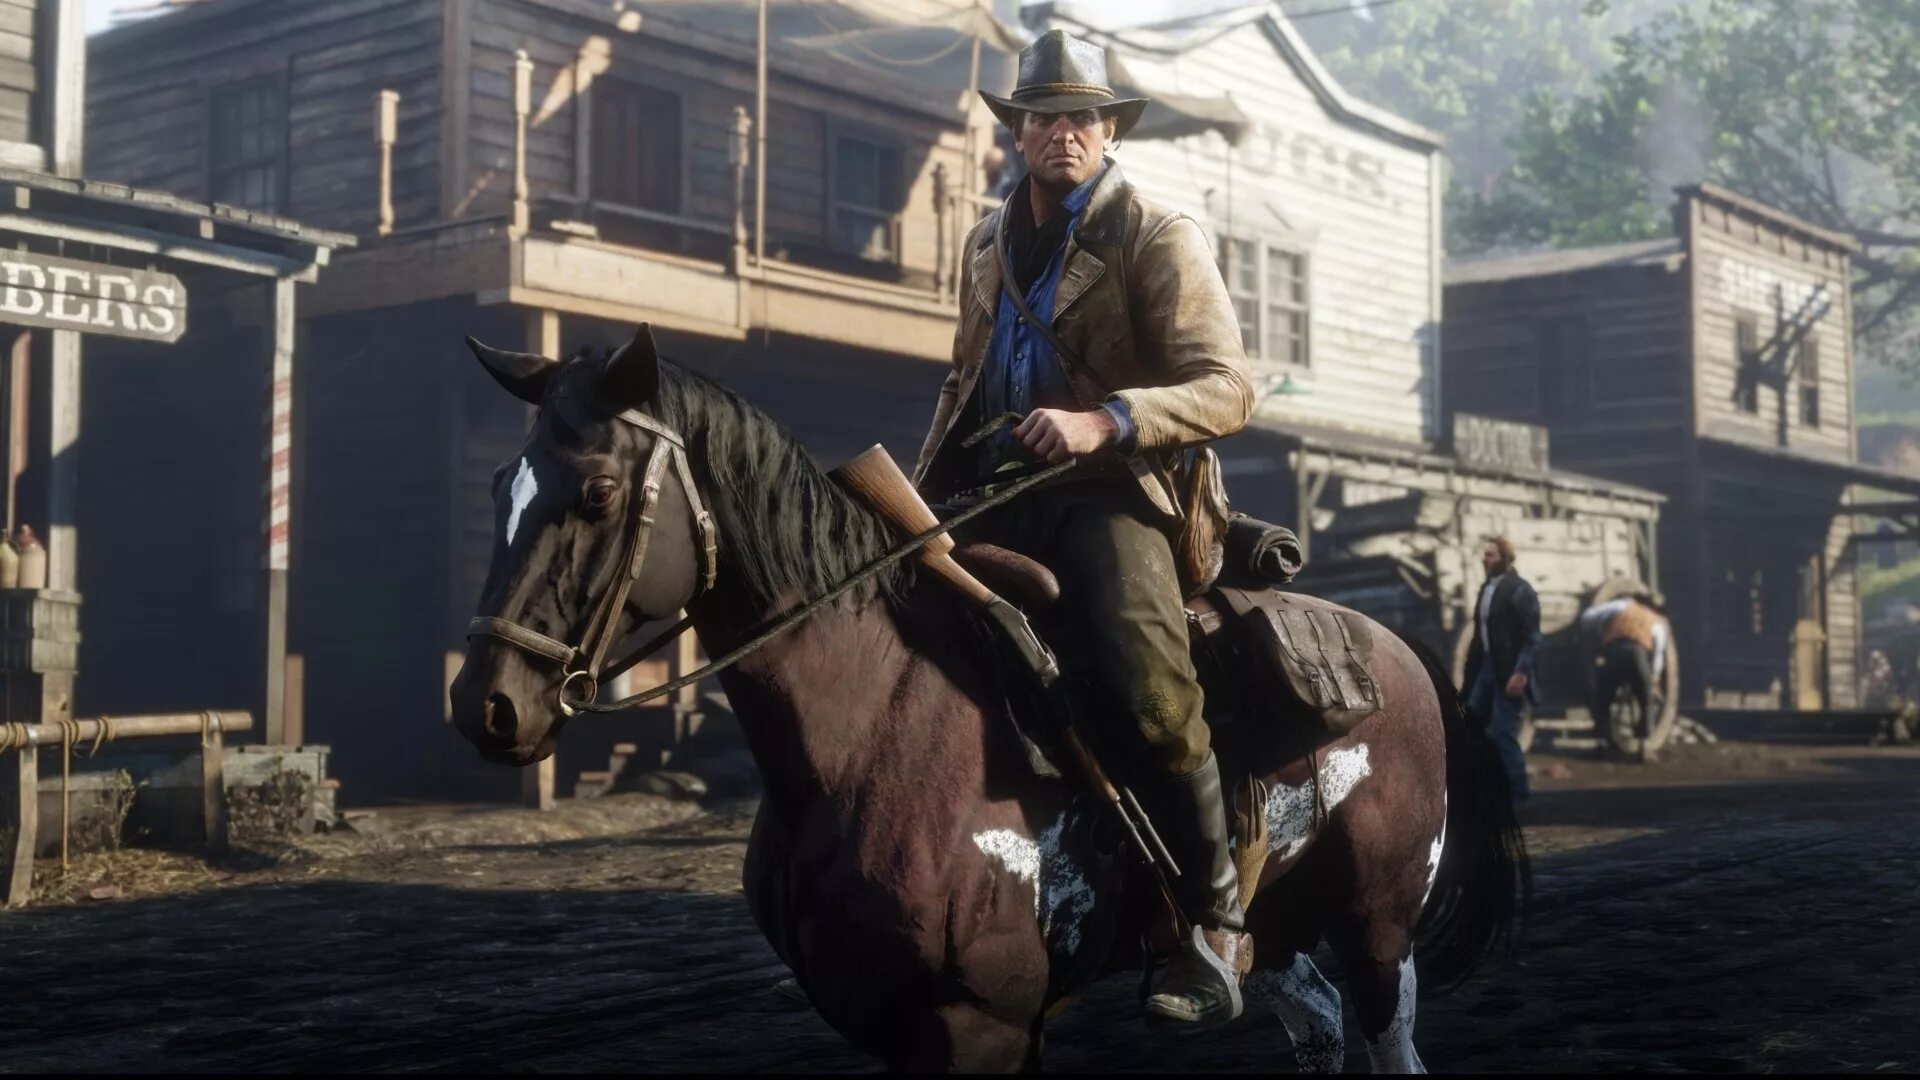 Red Dead Redemption 2. Xbox one Red Dead Redemption 2. Red Dead Redemption 2 Xbox. Red Dead Redemption 2 1. Игра на xbox red dead redemption